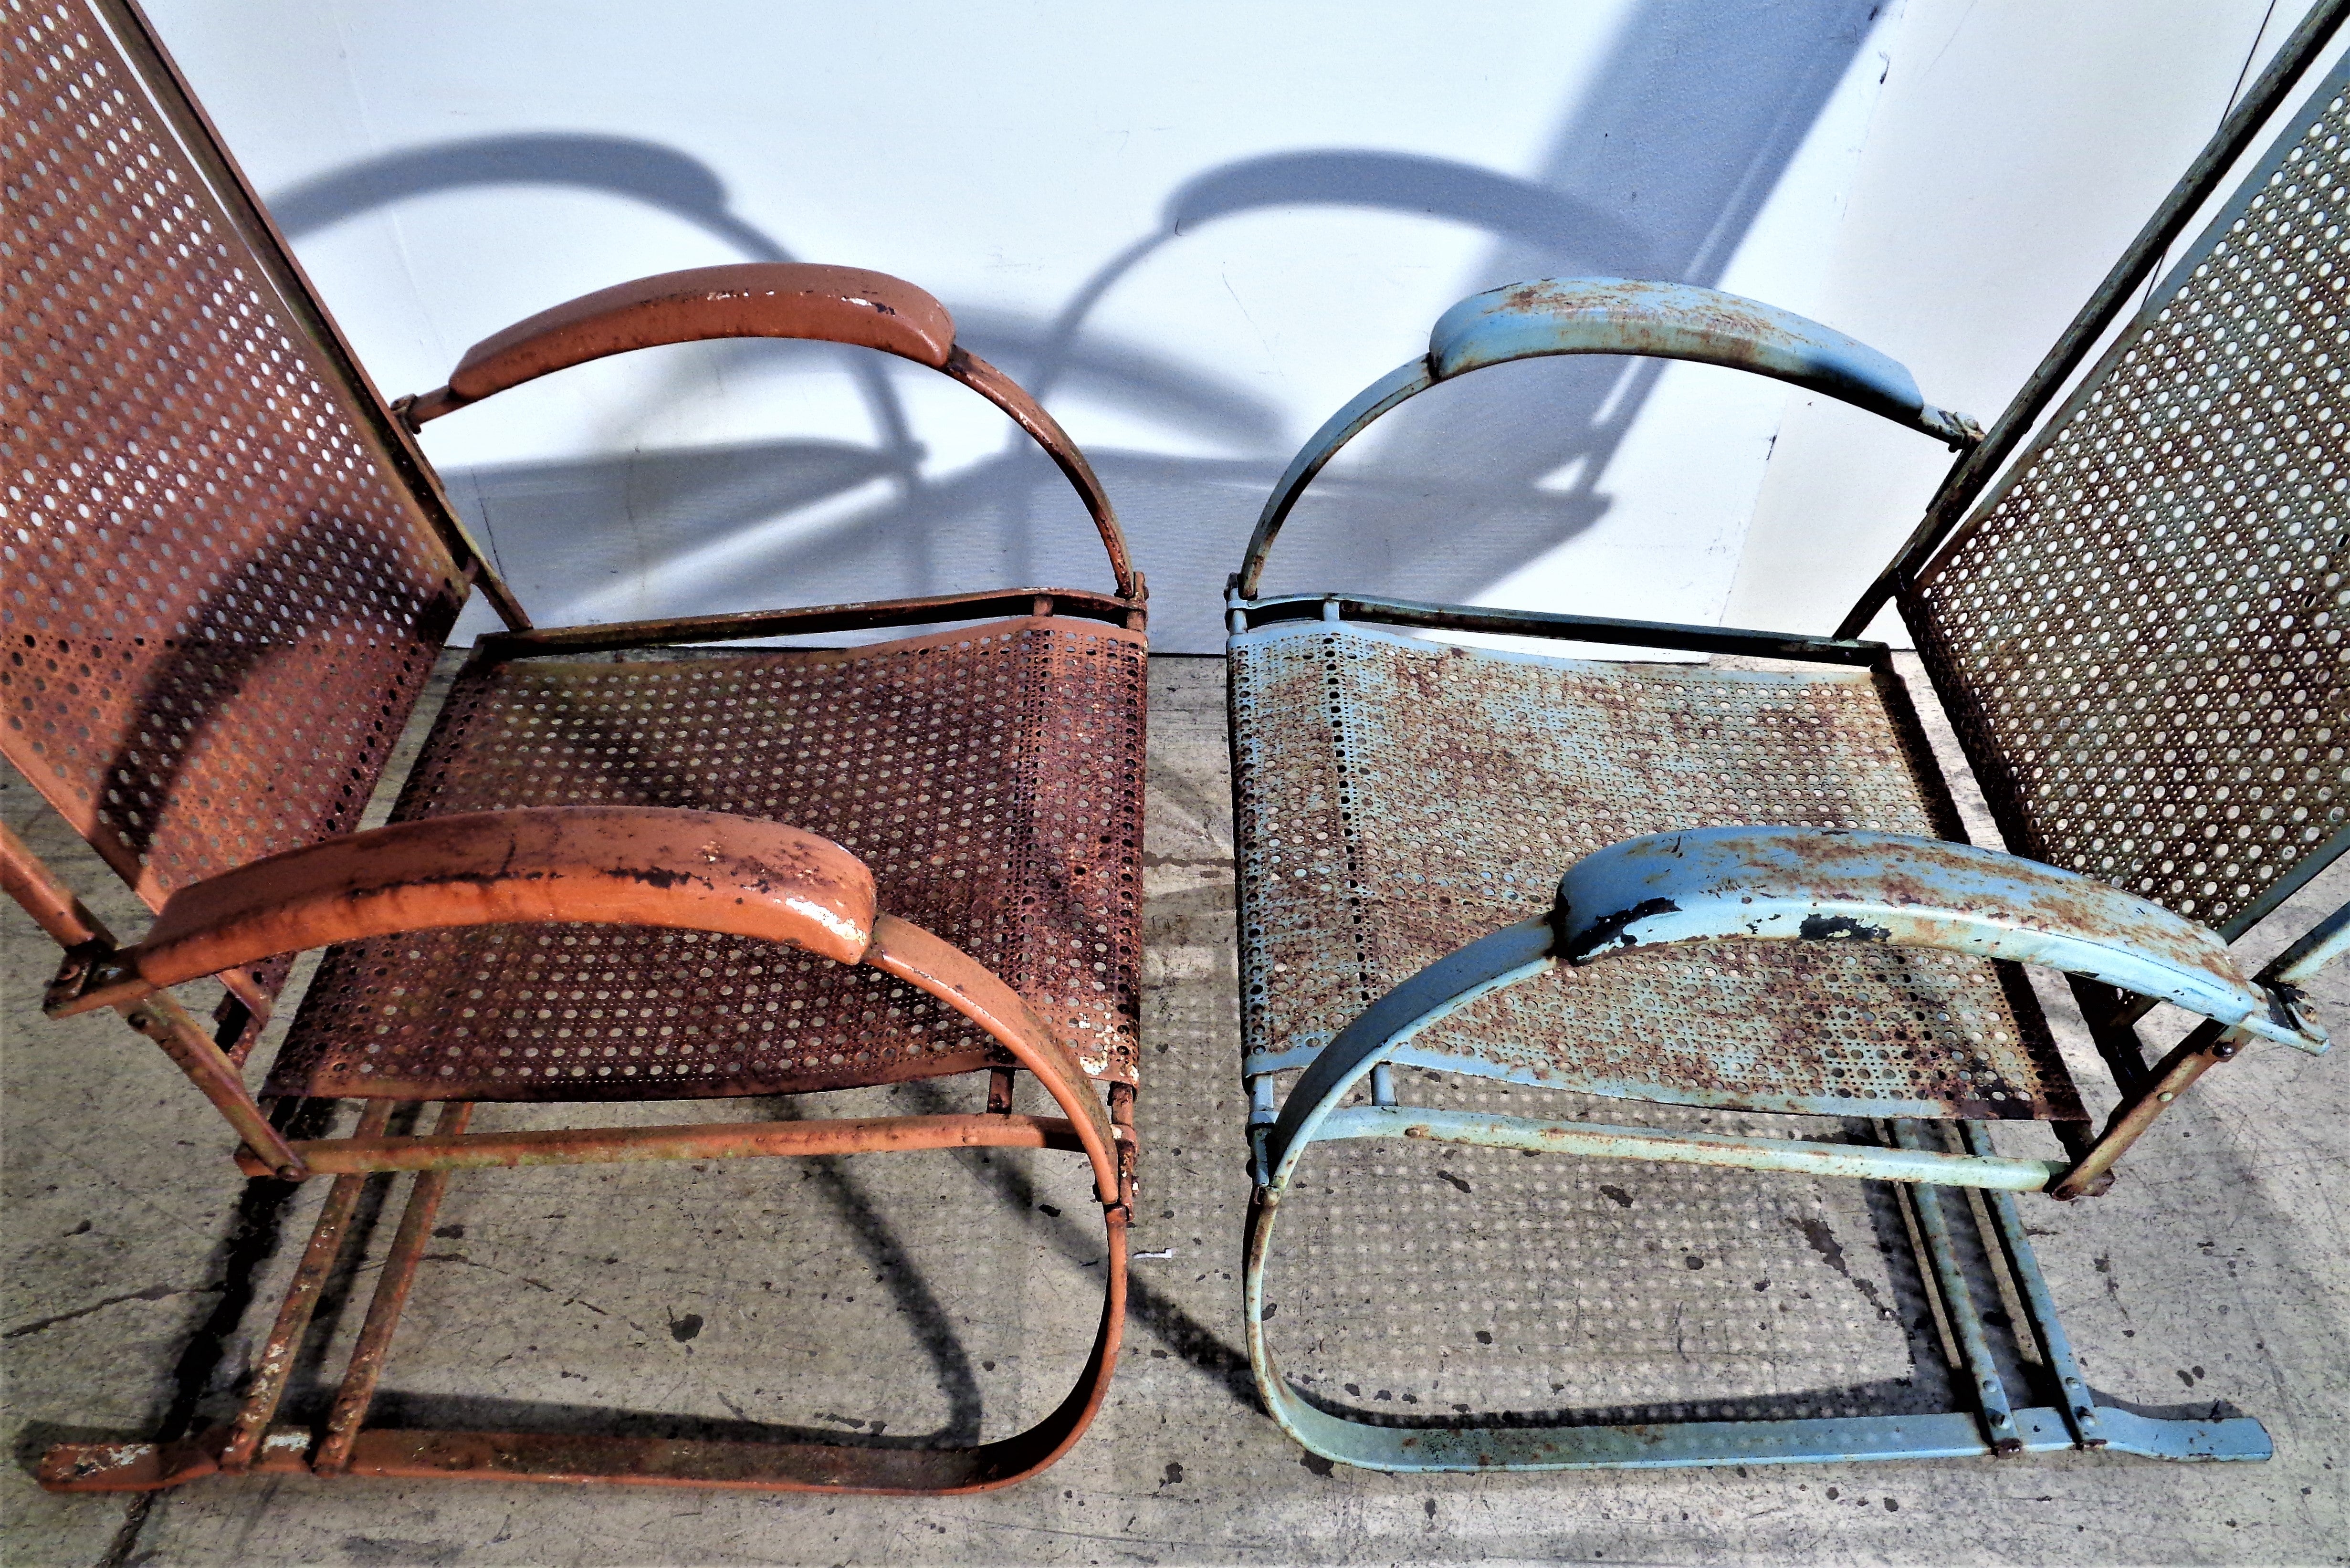 A large scale pair of spring steel metal mesh high back cantilever bounce armchairs in beautifully aged original worn pale blue and salmon painted surface. Manufactured by Howell Company, circa 1930's. A find model with classic old school style and